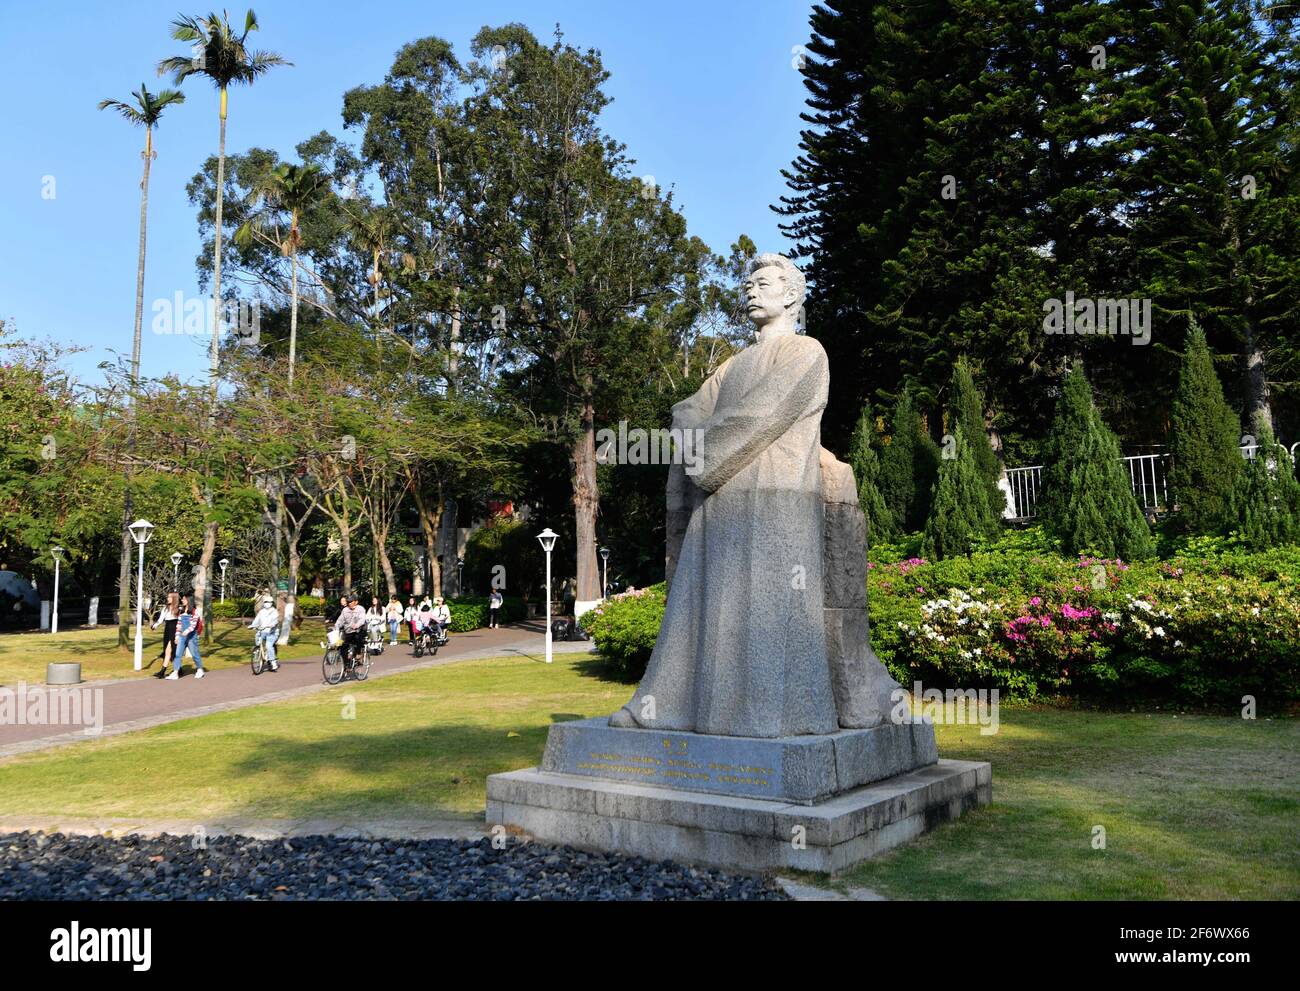 Xiamen. 26th Mar, 2021. Photo taken on March 26, 2021 shows the sculpture of Lu Xun, one of the most famous contemporary Chinese writers, at the Xiamen University in Xiamen, southeast China's Fujian Province. Xiamen University, based in China's southeastern city of Xiamen, was founded by Tan Kah Kee in 1921, making it the first Chinese university founded by an overseas Chinese national. This year, Xiamen University greets its 100th birthday anniversary. Credit: Wei Peiquan/Xinhua/Alamy Live News Stock Photo